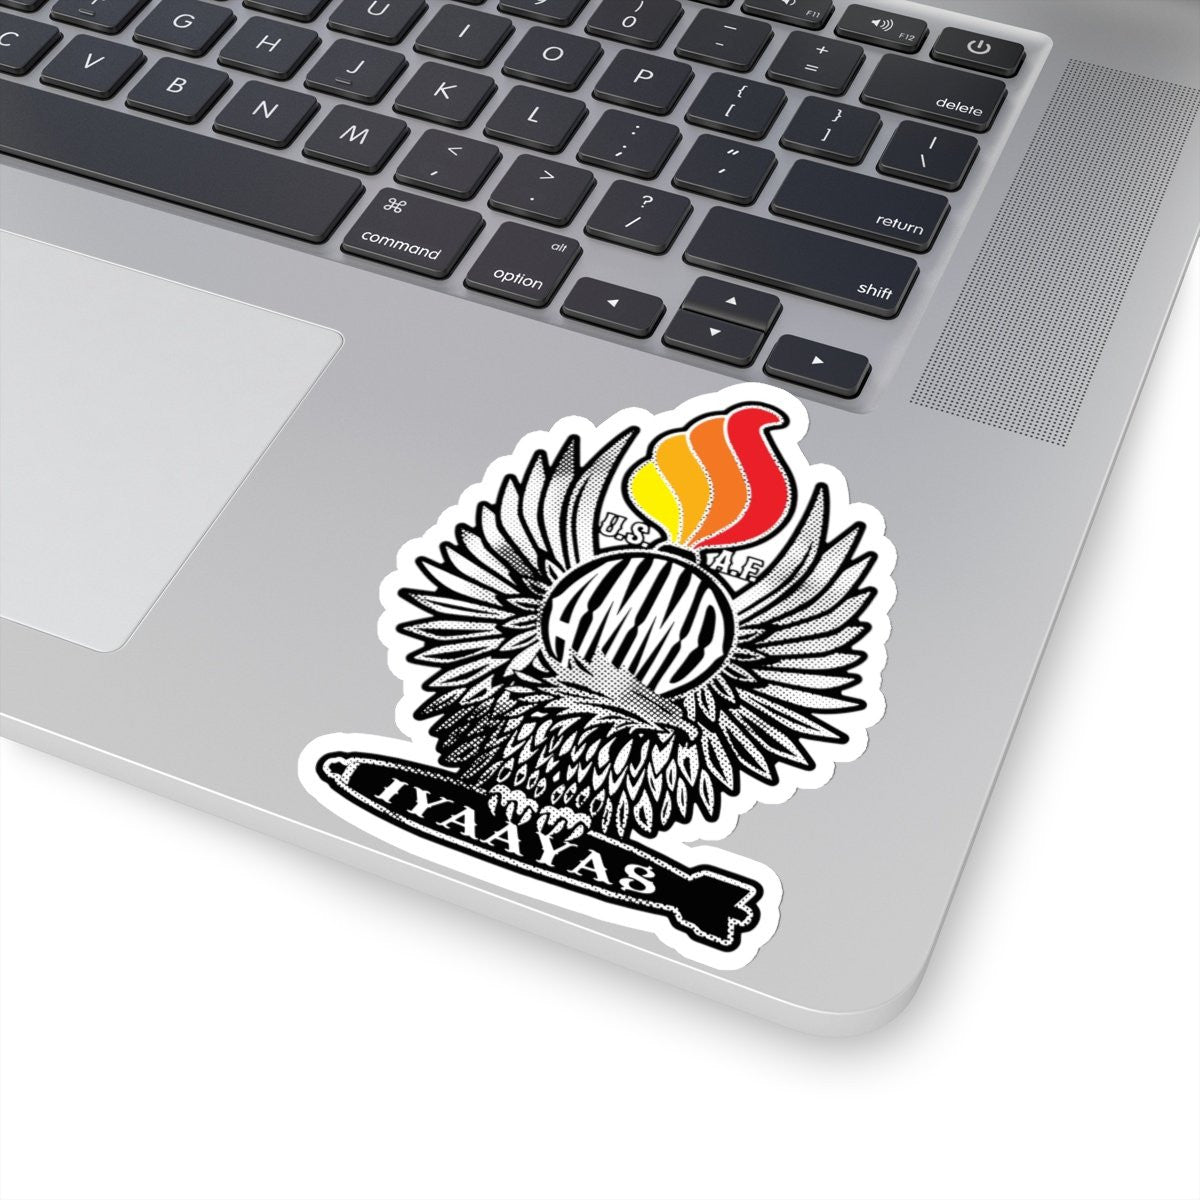 USAF AMMO IYAAYAS Eagle Claws MK-82 Pisspot Colored Flames Die Cut Indoor Stickers